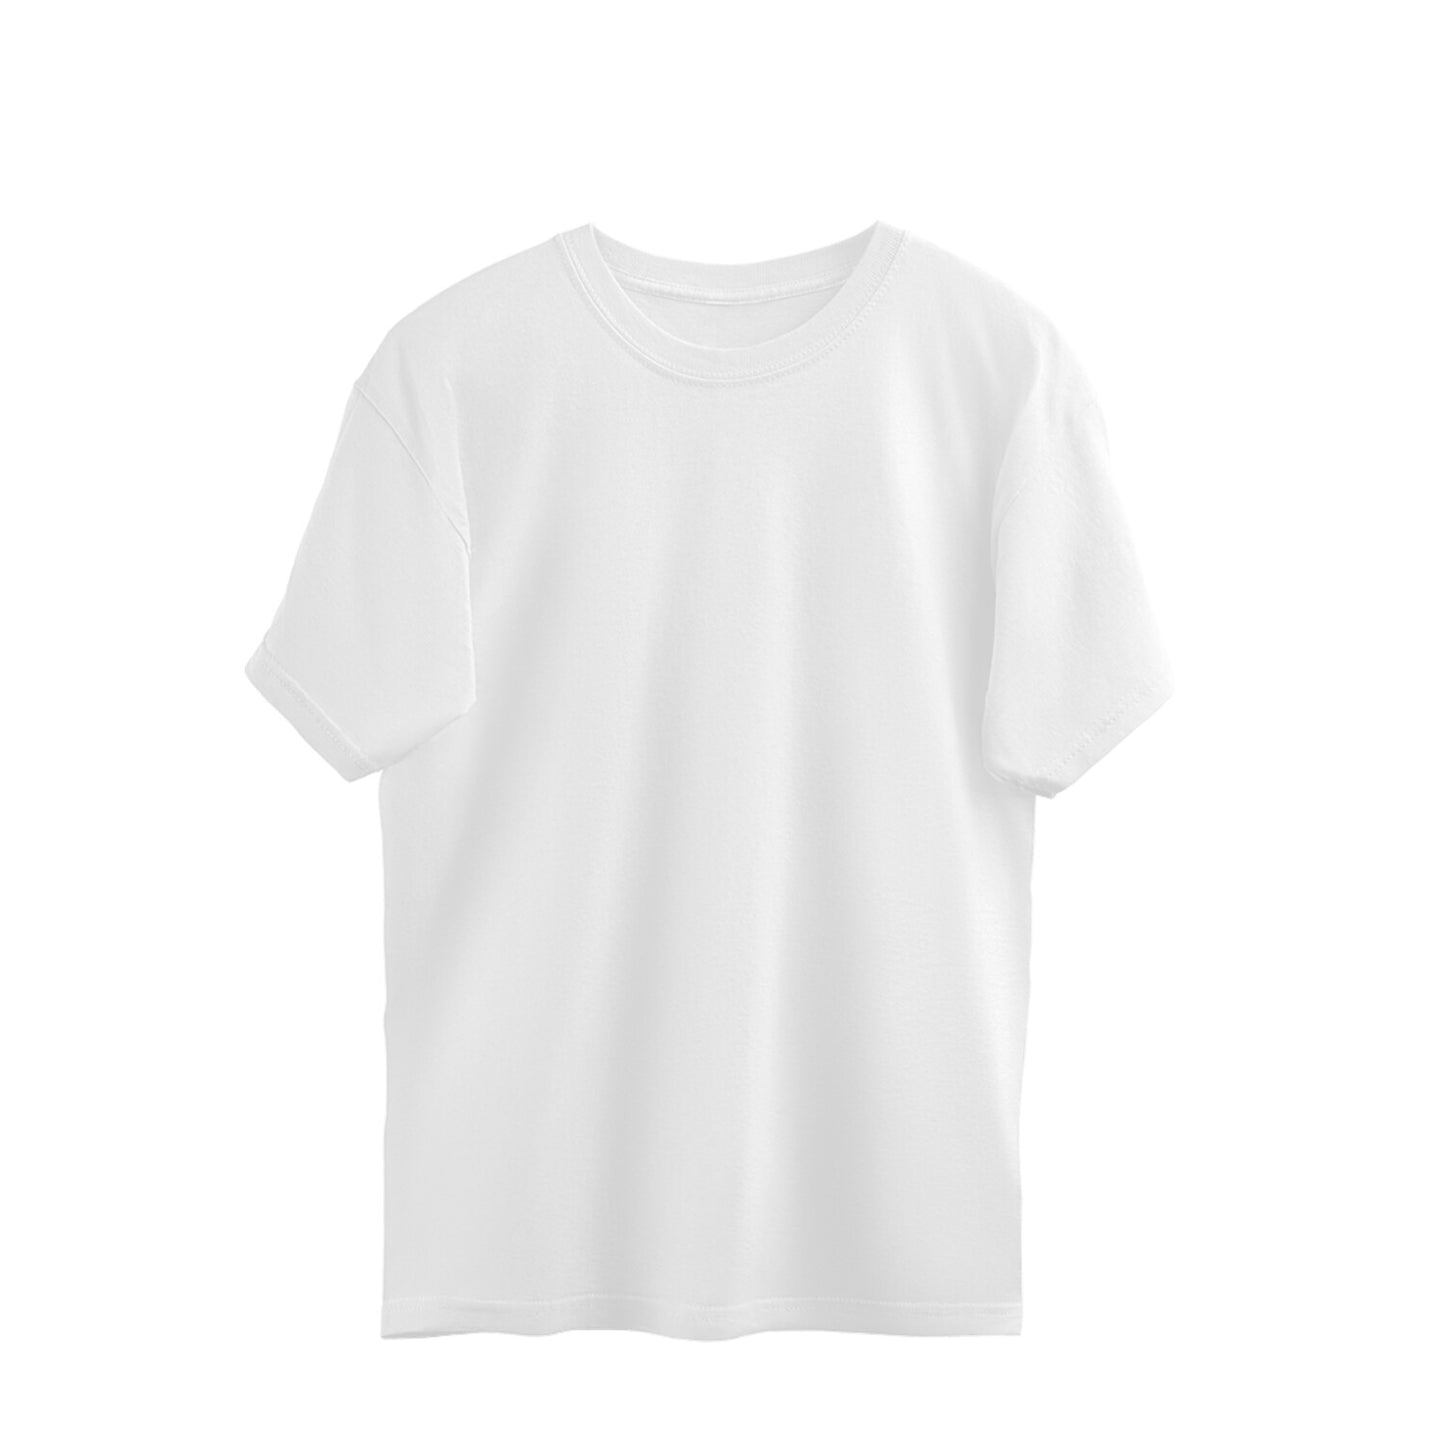 Solids : White Oversized Tee